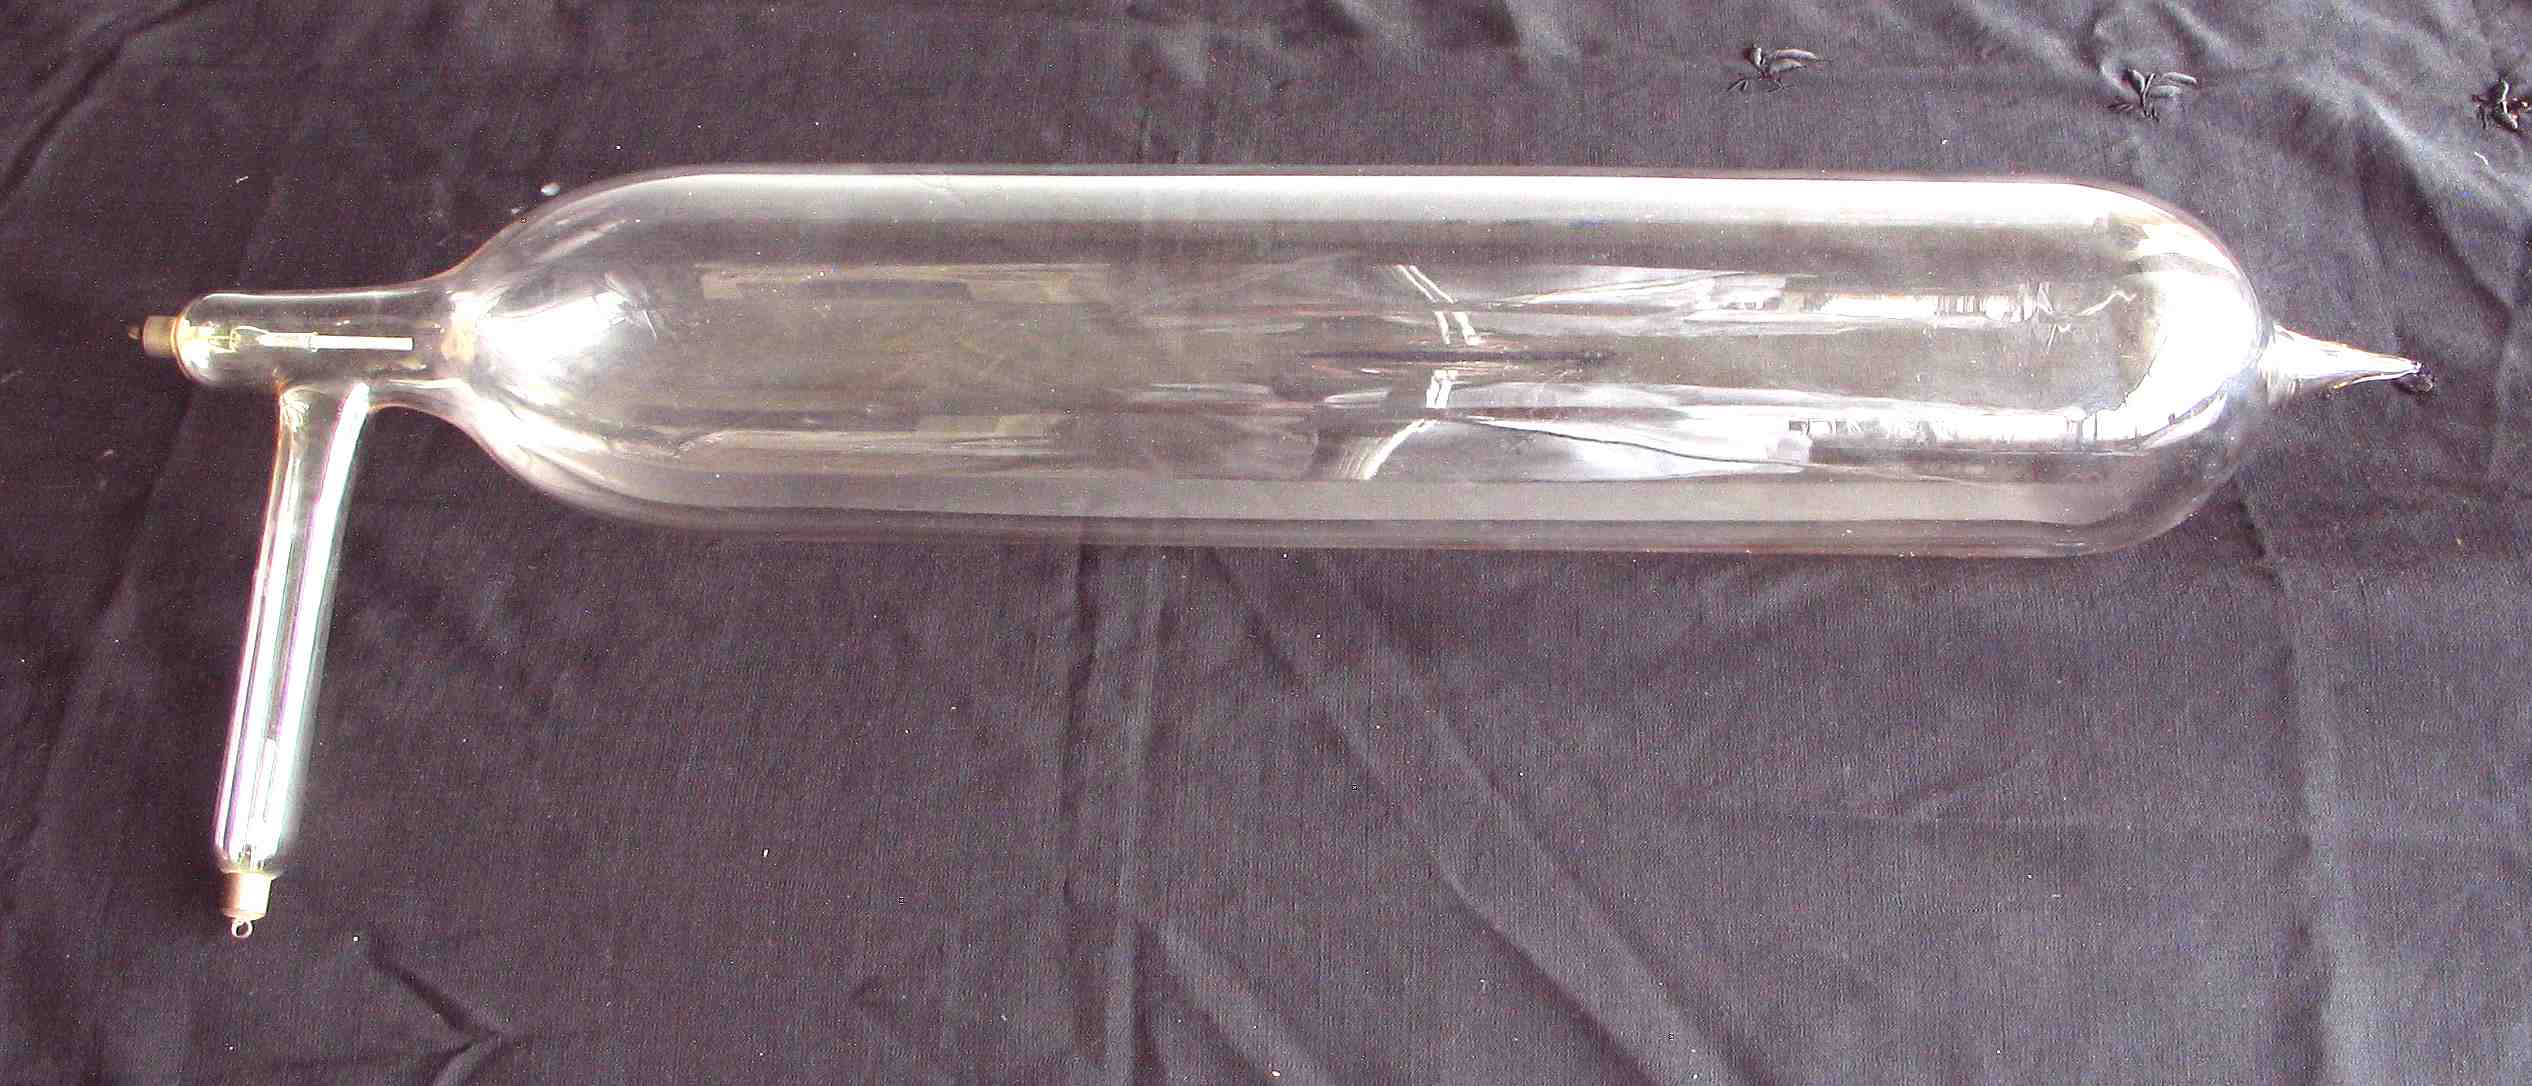 Tube de Righi
(rayons magnétiques)